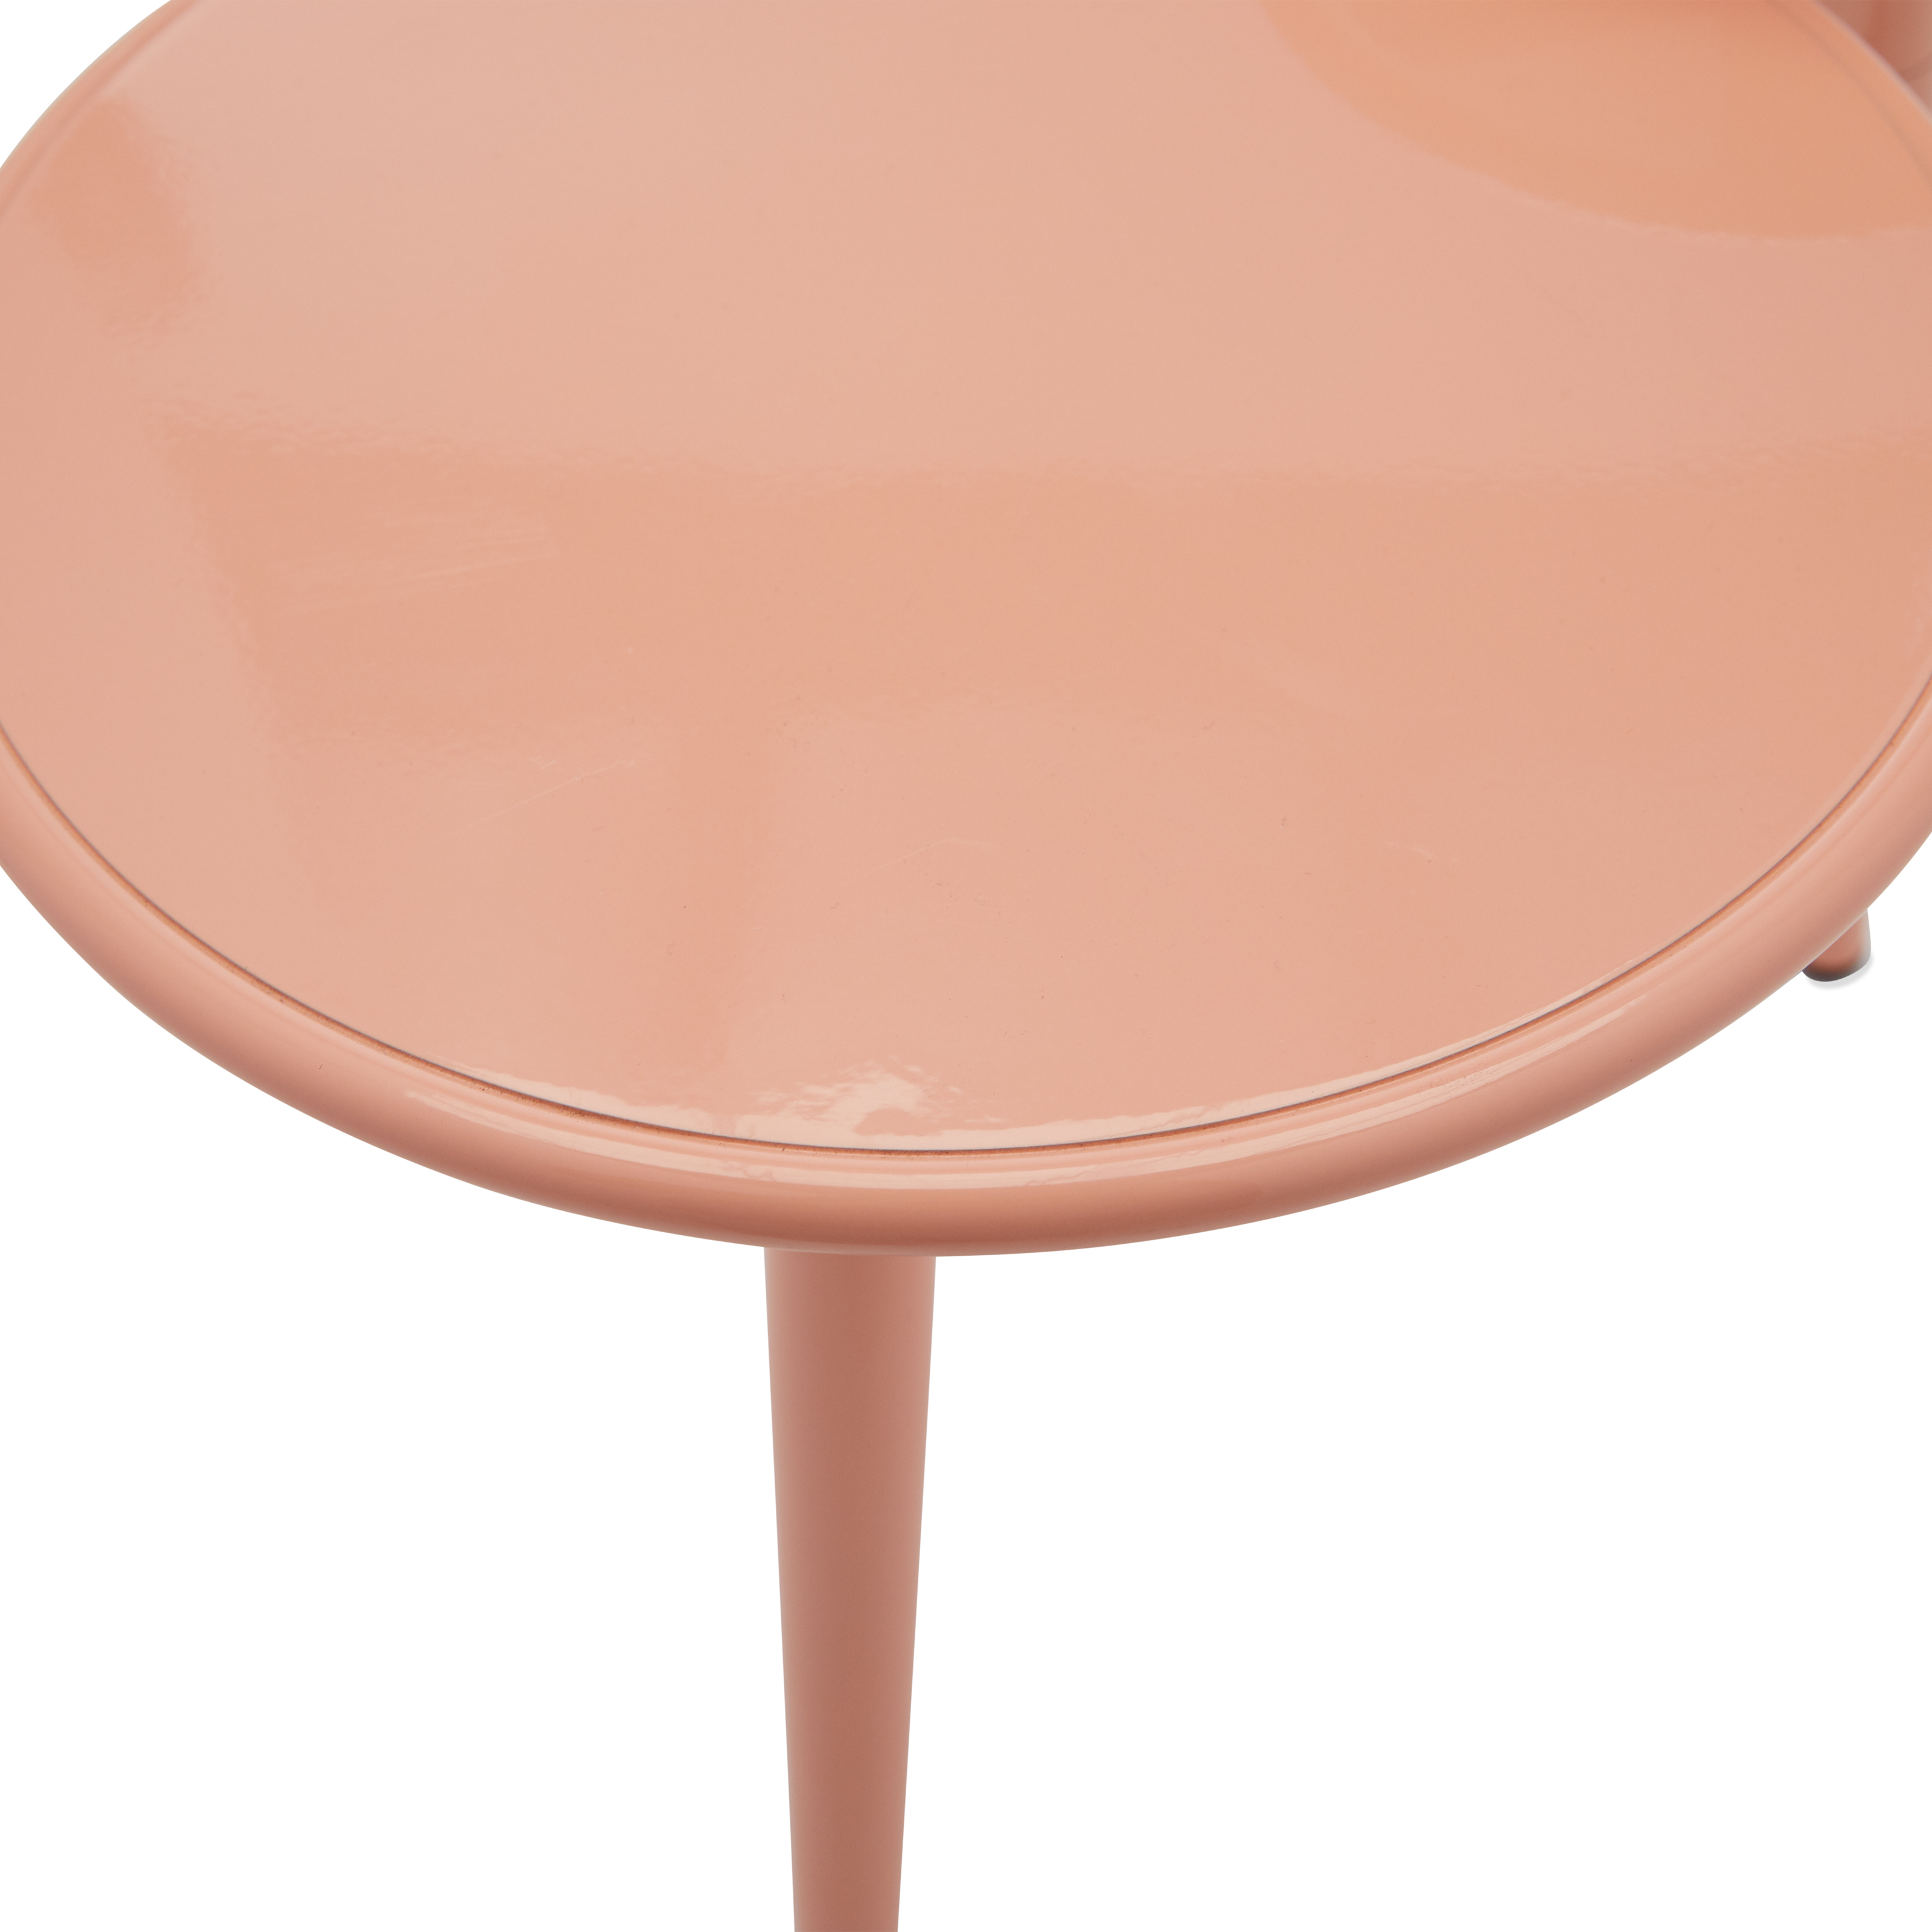 Multi-Tier Metal Accent Table, Multiple Colors by Drew Barrymore Flower Home - image 3 of 16